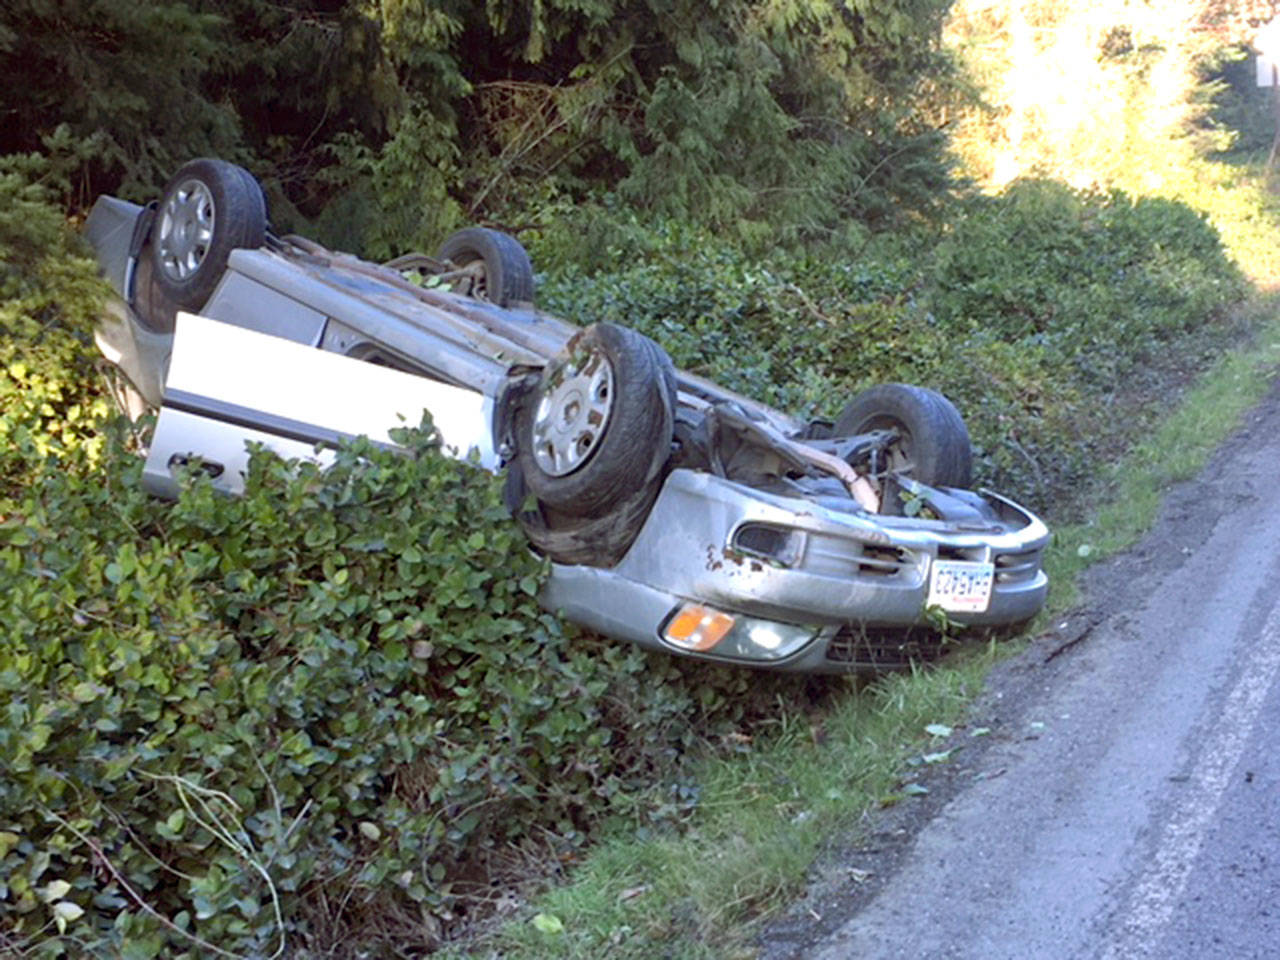 A Subaru flipped onto its top after the driver swerved to miss a deer in the road on state Highway 112. The driver was reported as not injured. (Clallam County Fire District No. 2)